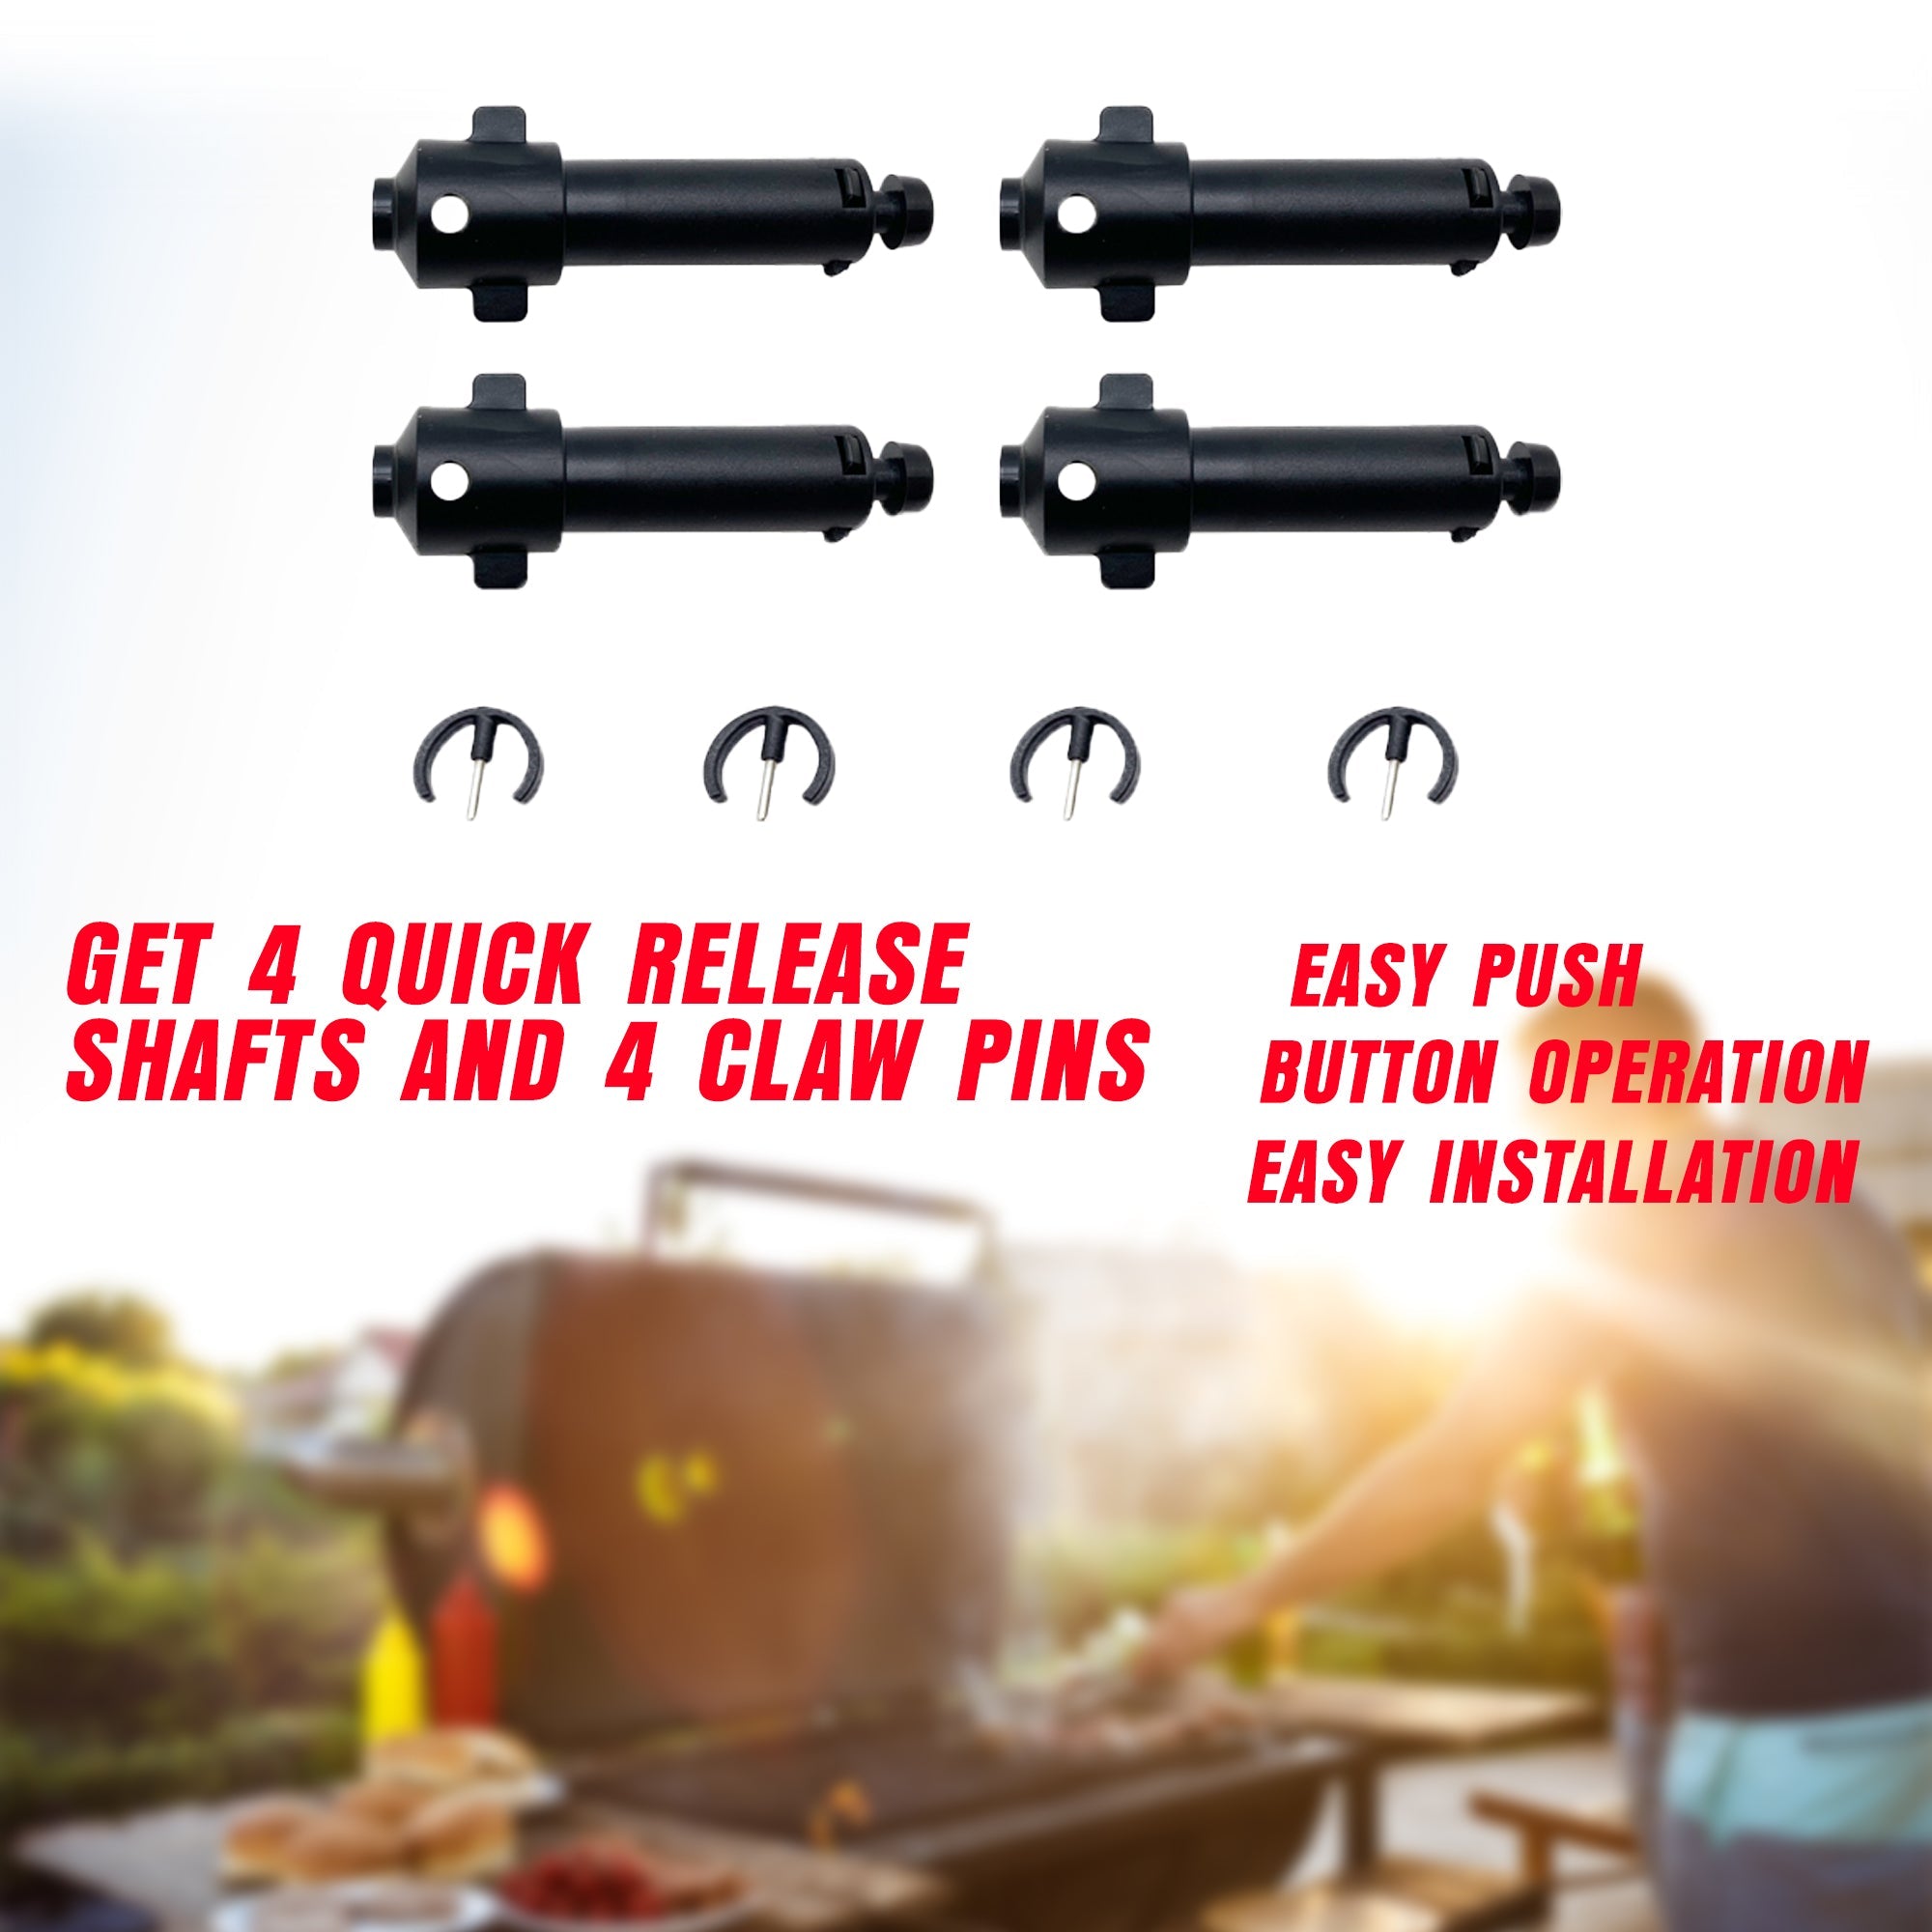 New Quick Release Grill Brush Adapter (3 per pack)!